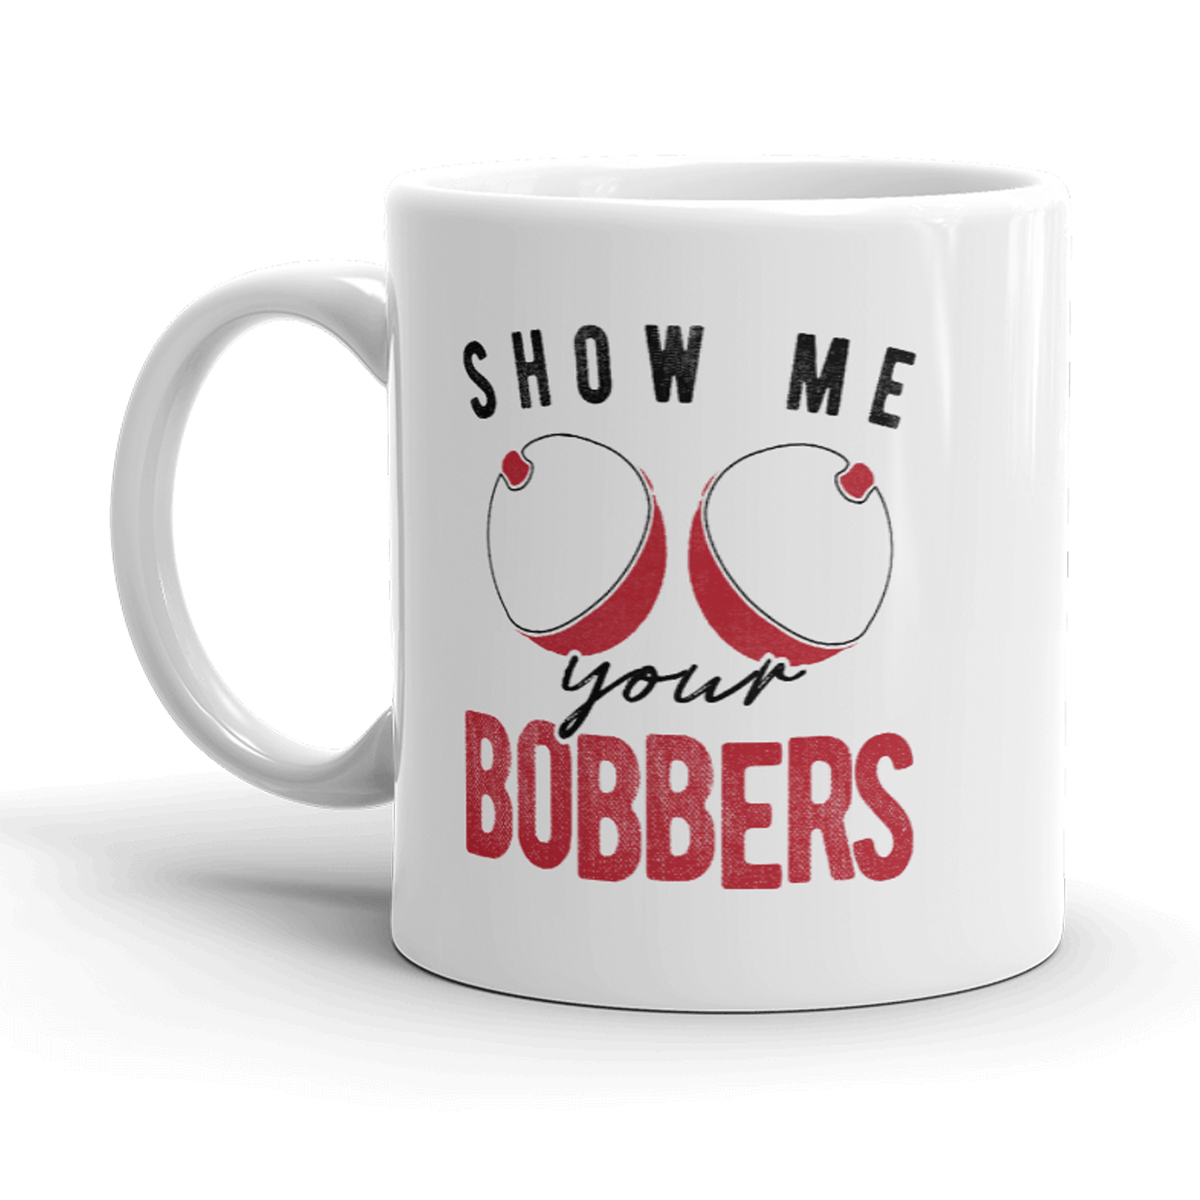 Show Me Your Bobbers Mug Funny Fishing Boobs Novelty Coffee Cup-11oz - Crazy Dog T-Shirts